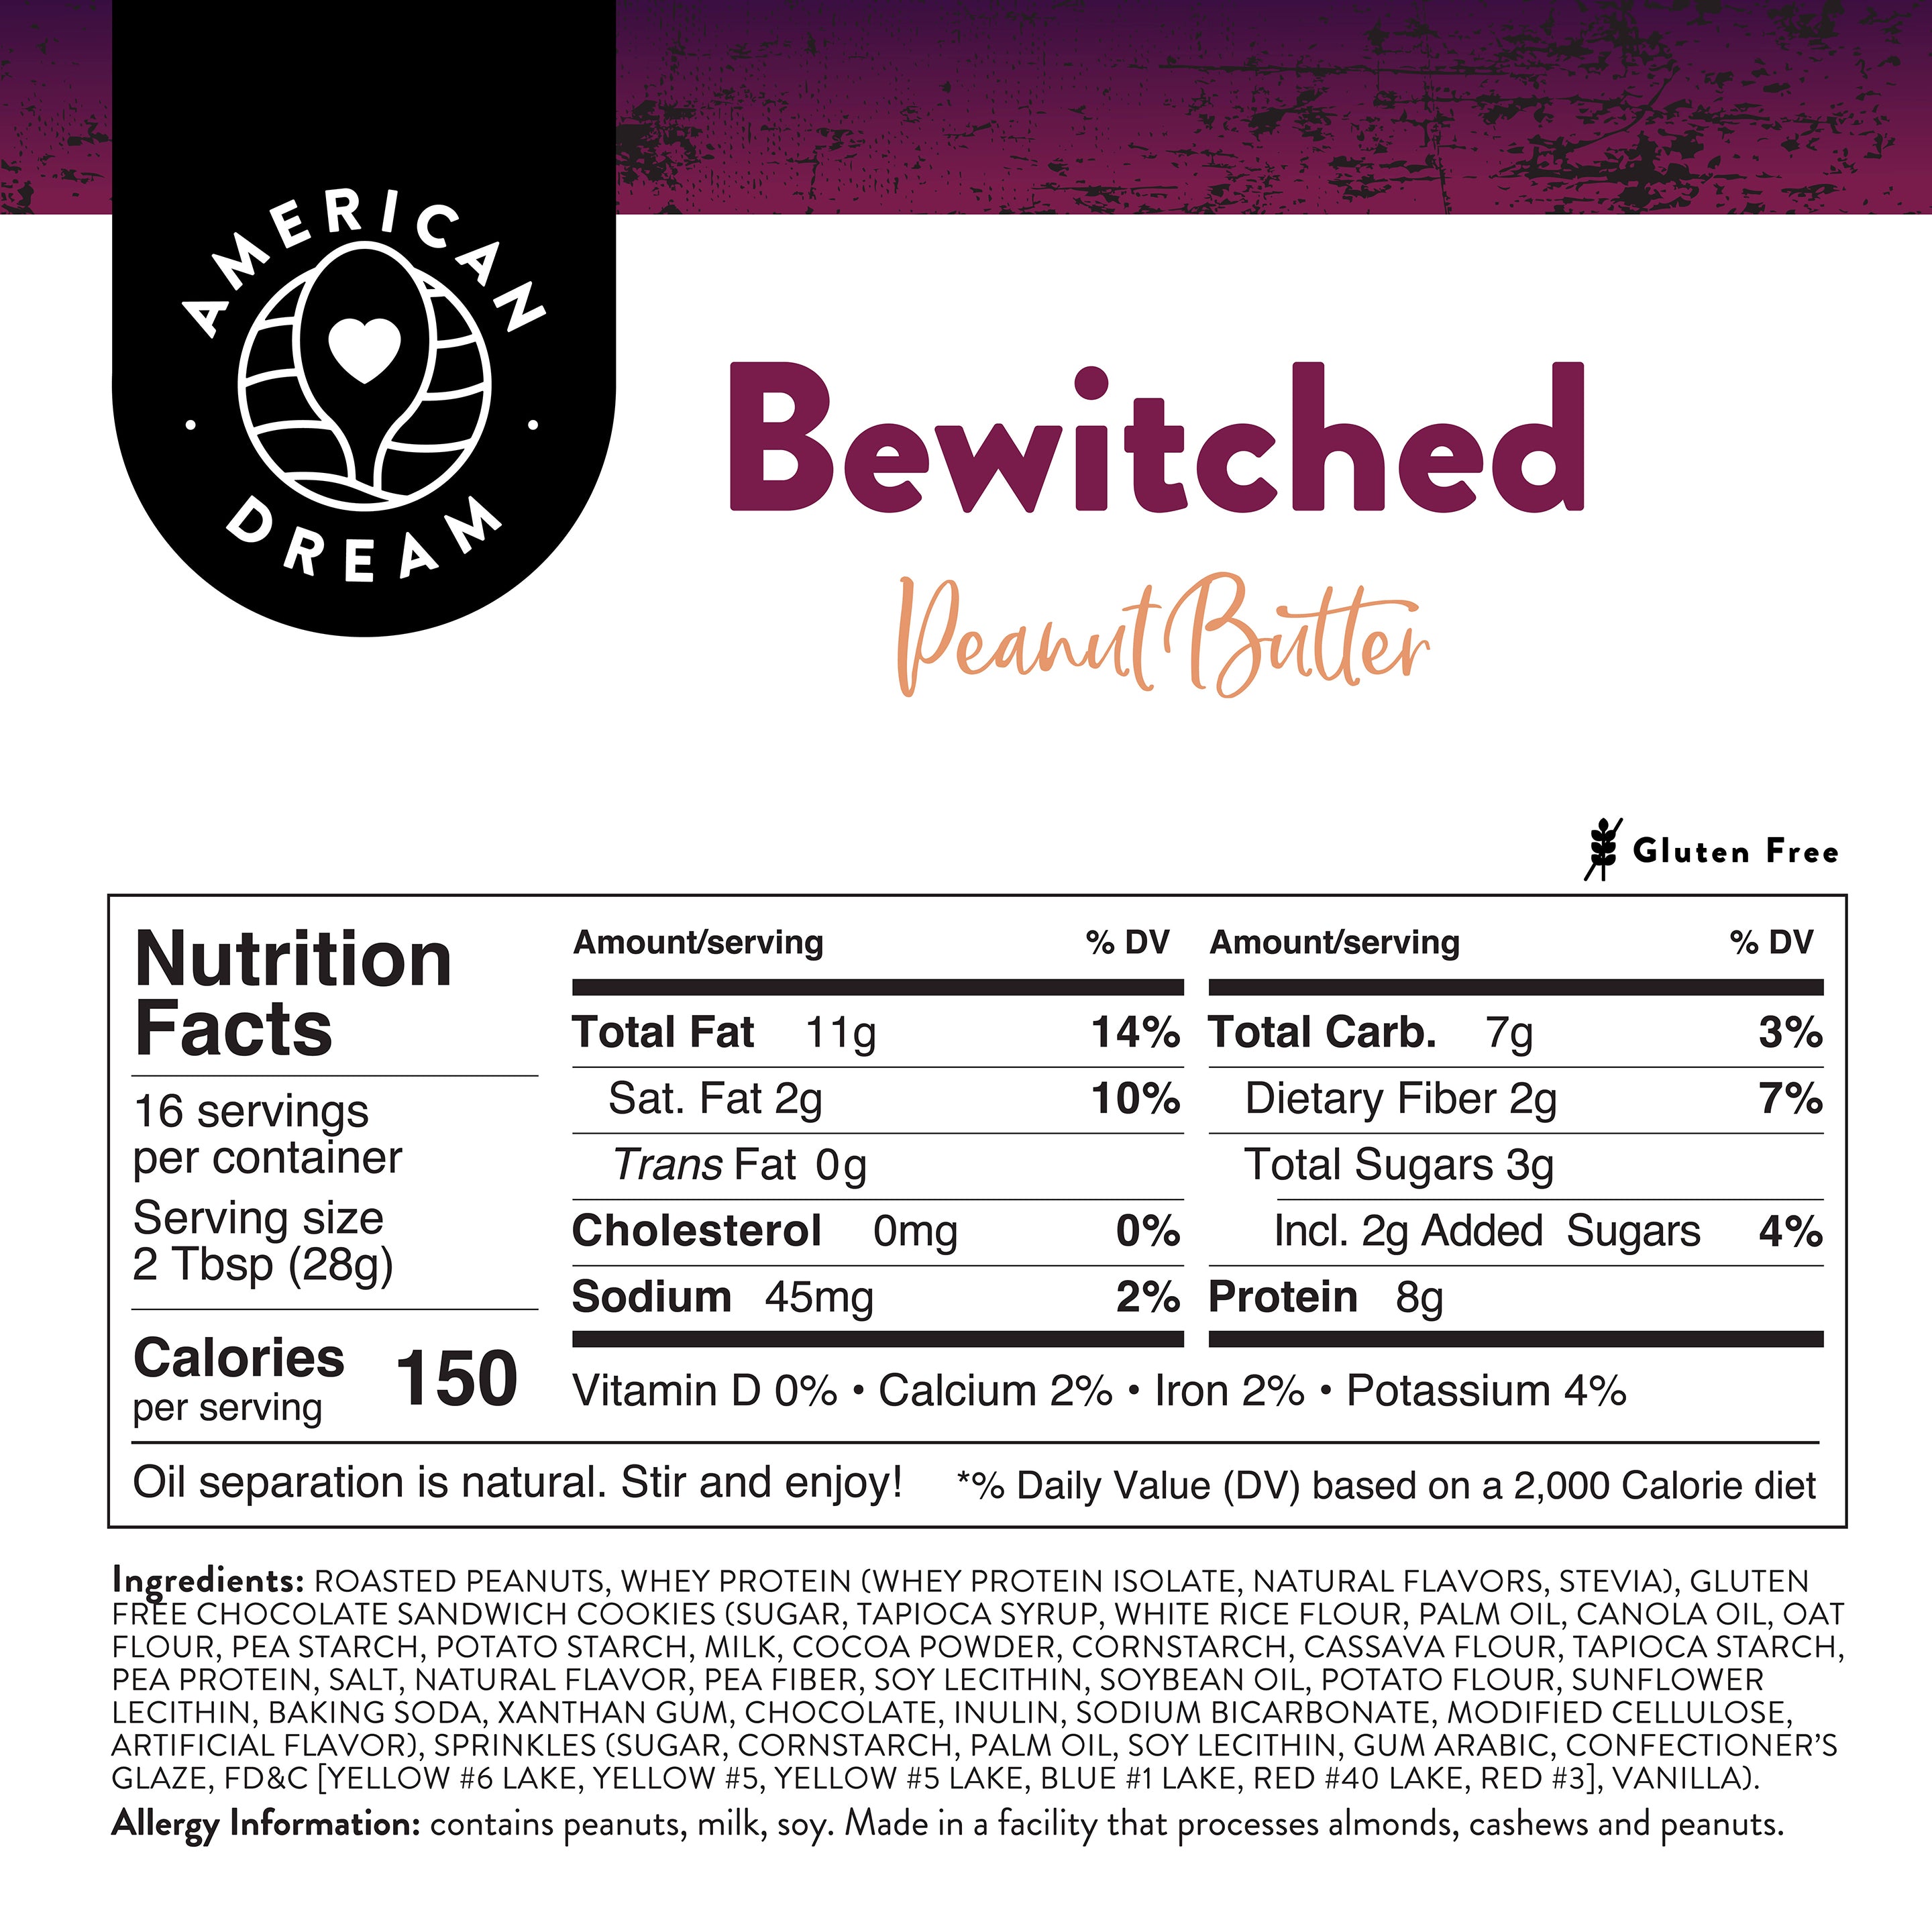 Gluten-Free Bewitched Peanut Butter